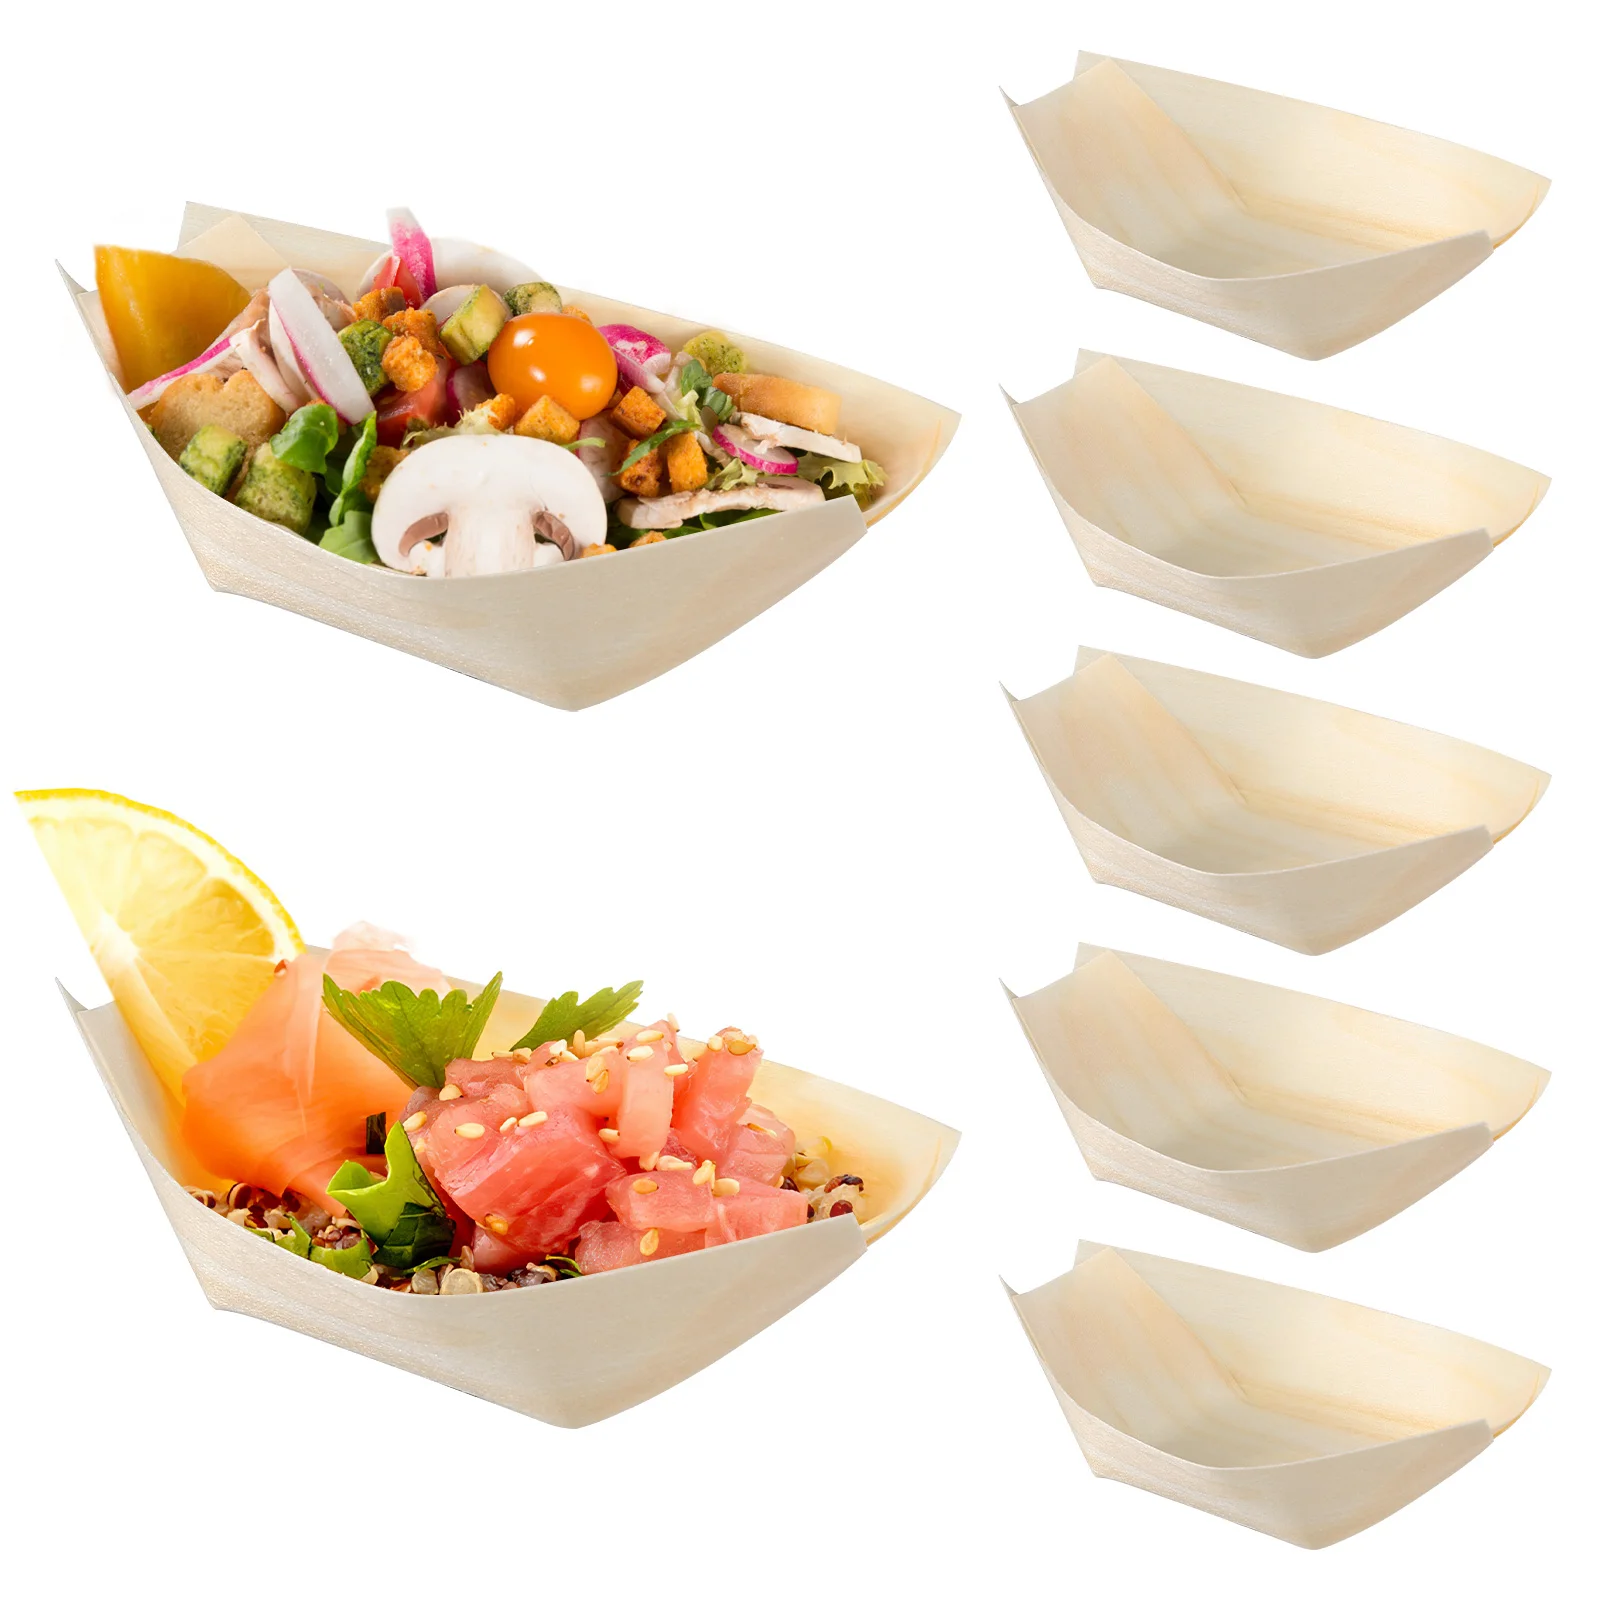 

100 Pcs Taco Bar Serving Set Party Paper Boats Food Sushi Dessert Tray Plates Vegetable Platter Trays Disposable Wooden